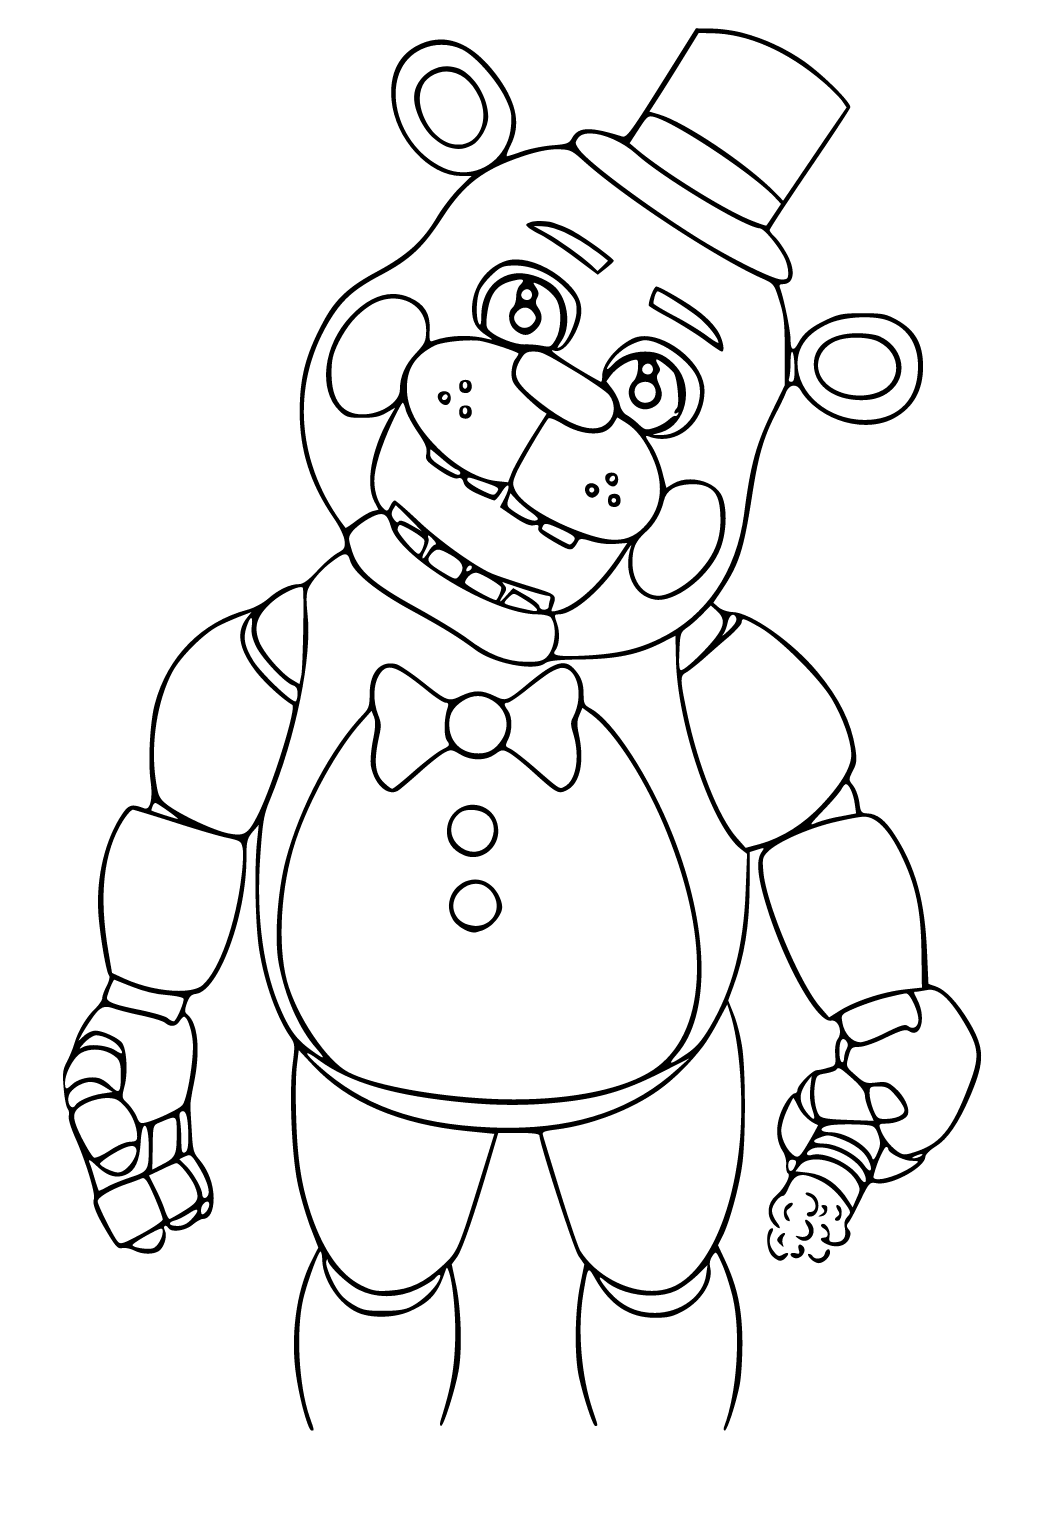 Final Chapter / Five Nights Ar Freddy's fanart / FNAF 4 art (disclaimer,  non of this is mine!)